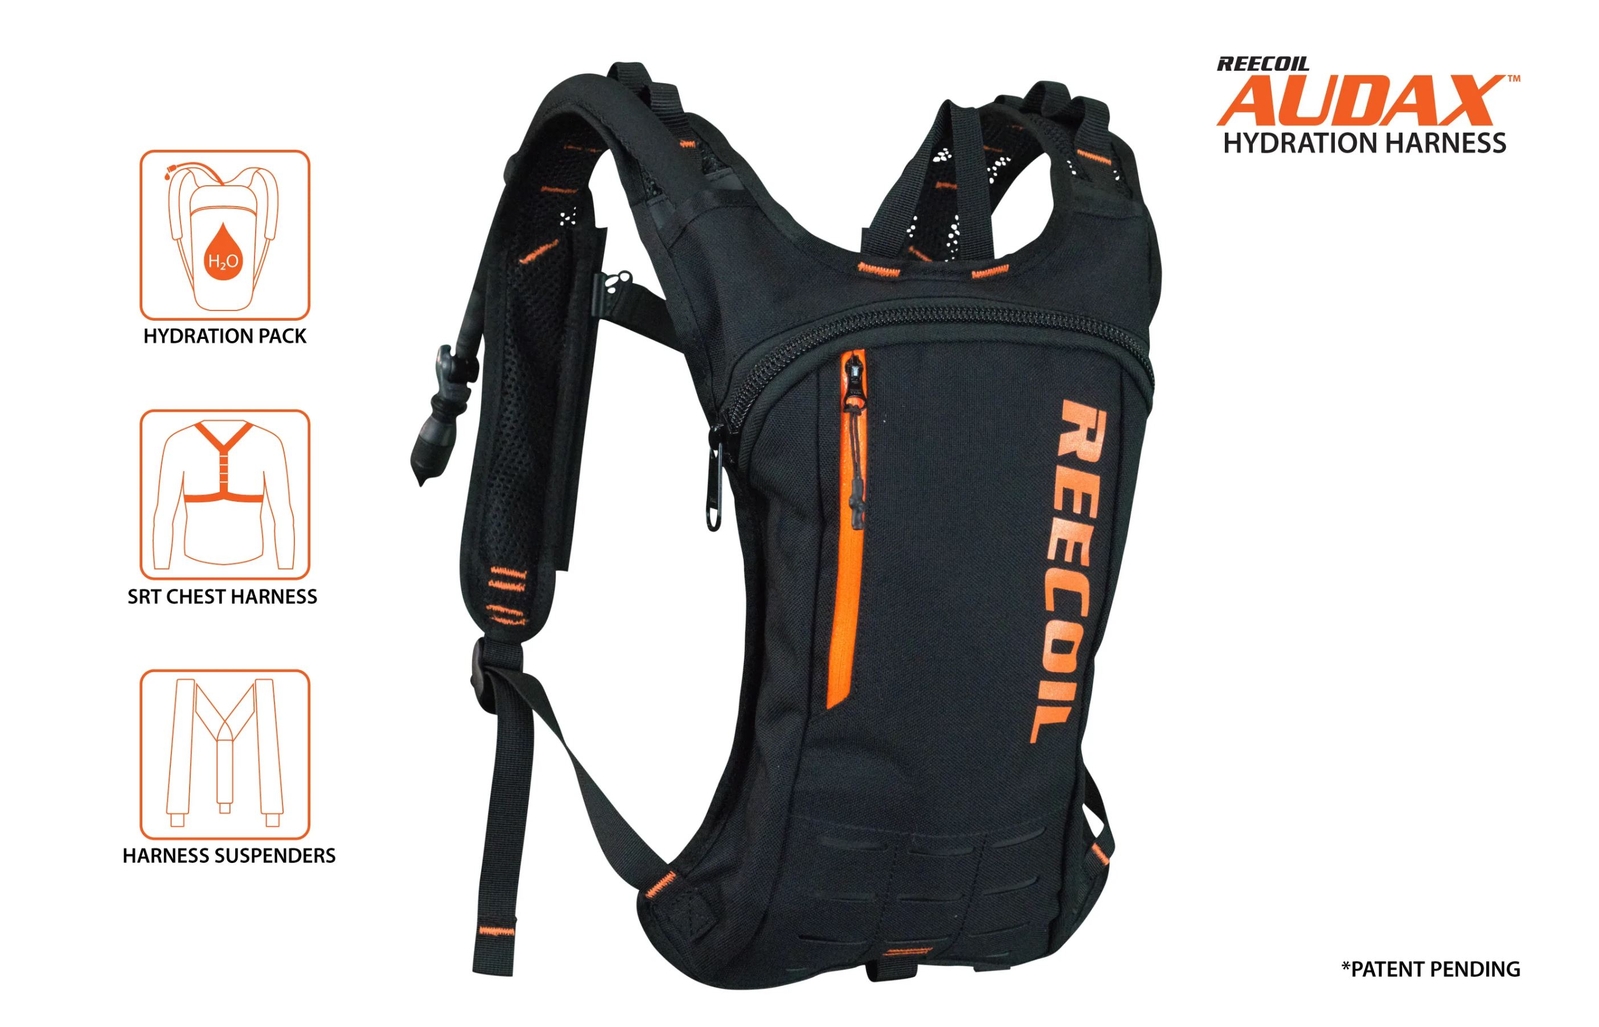 Reecoil AUDAX™ 1500 HYDRATION HARNESS